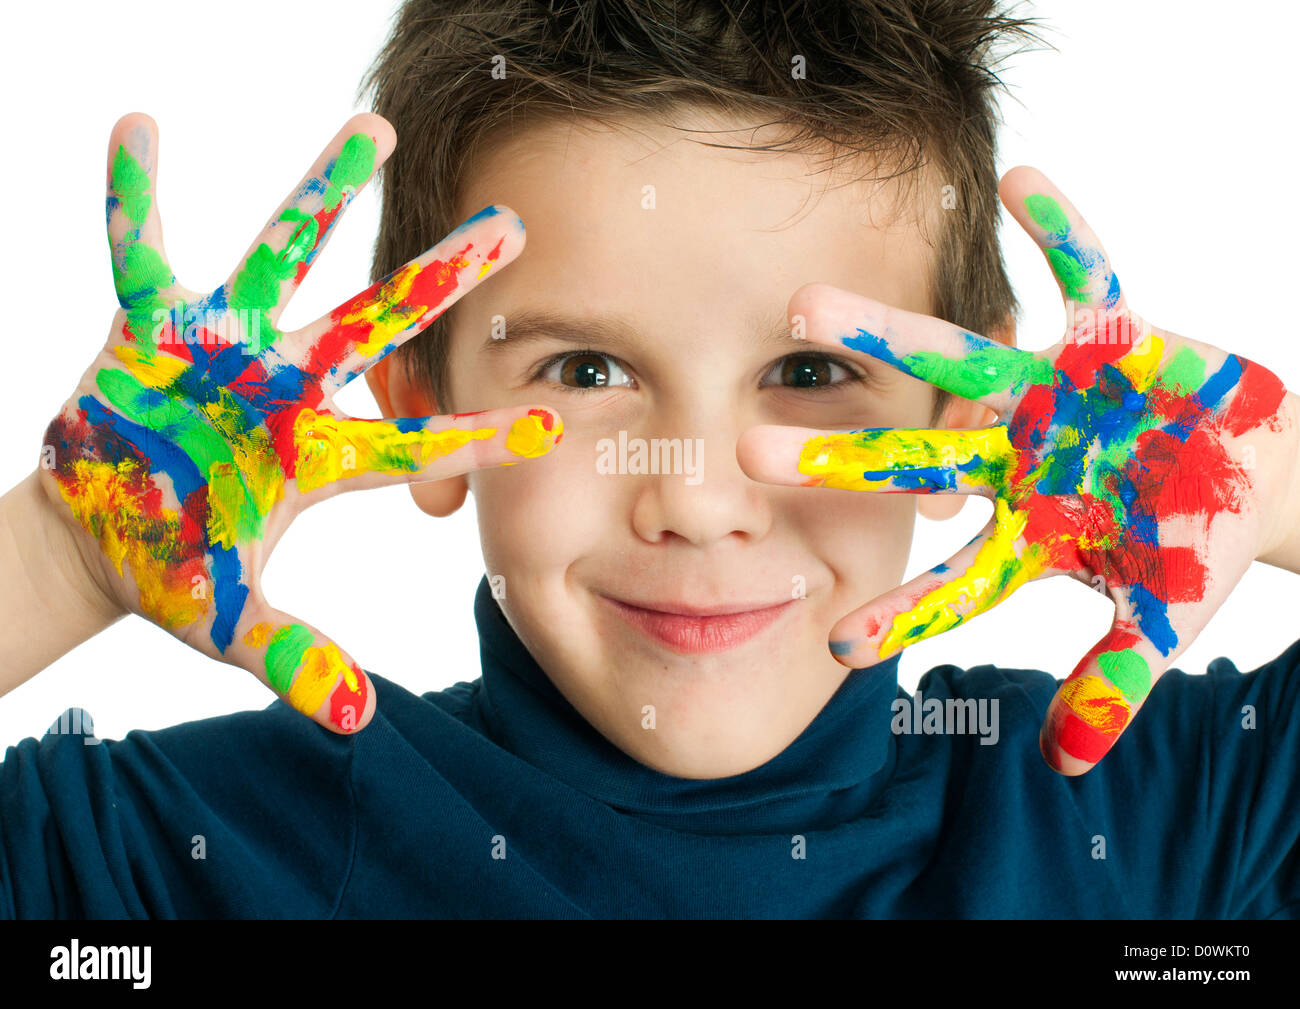 Boy hands painted with colorful paint. White islated smiling child Stock Photo